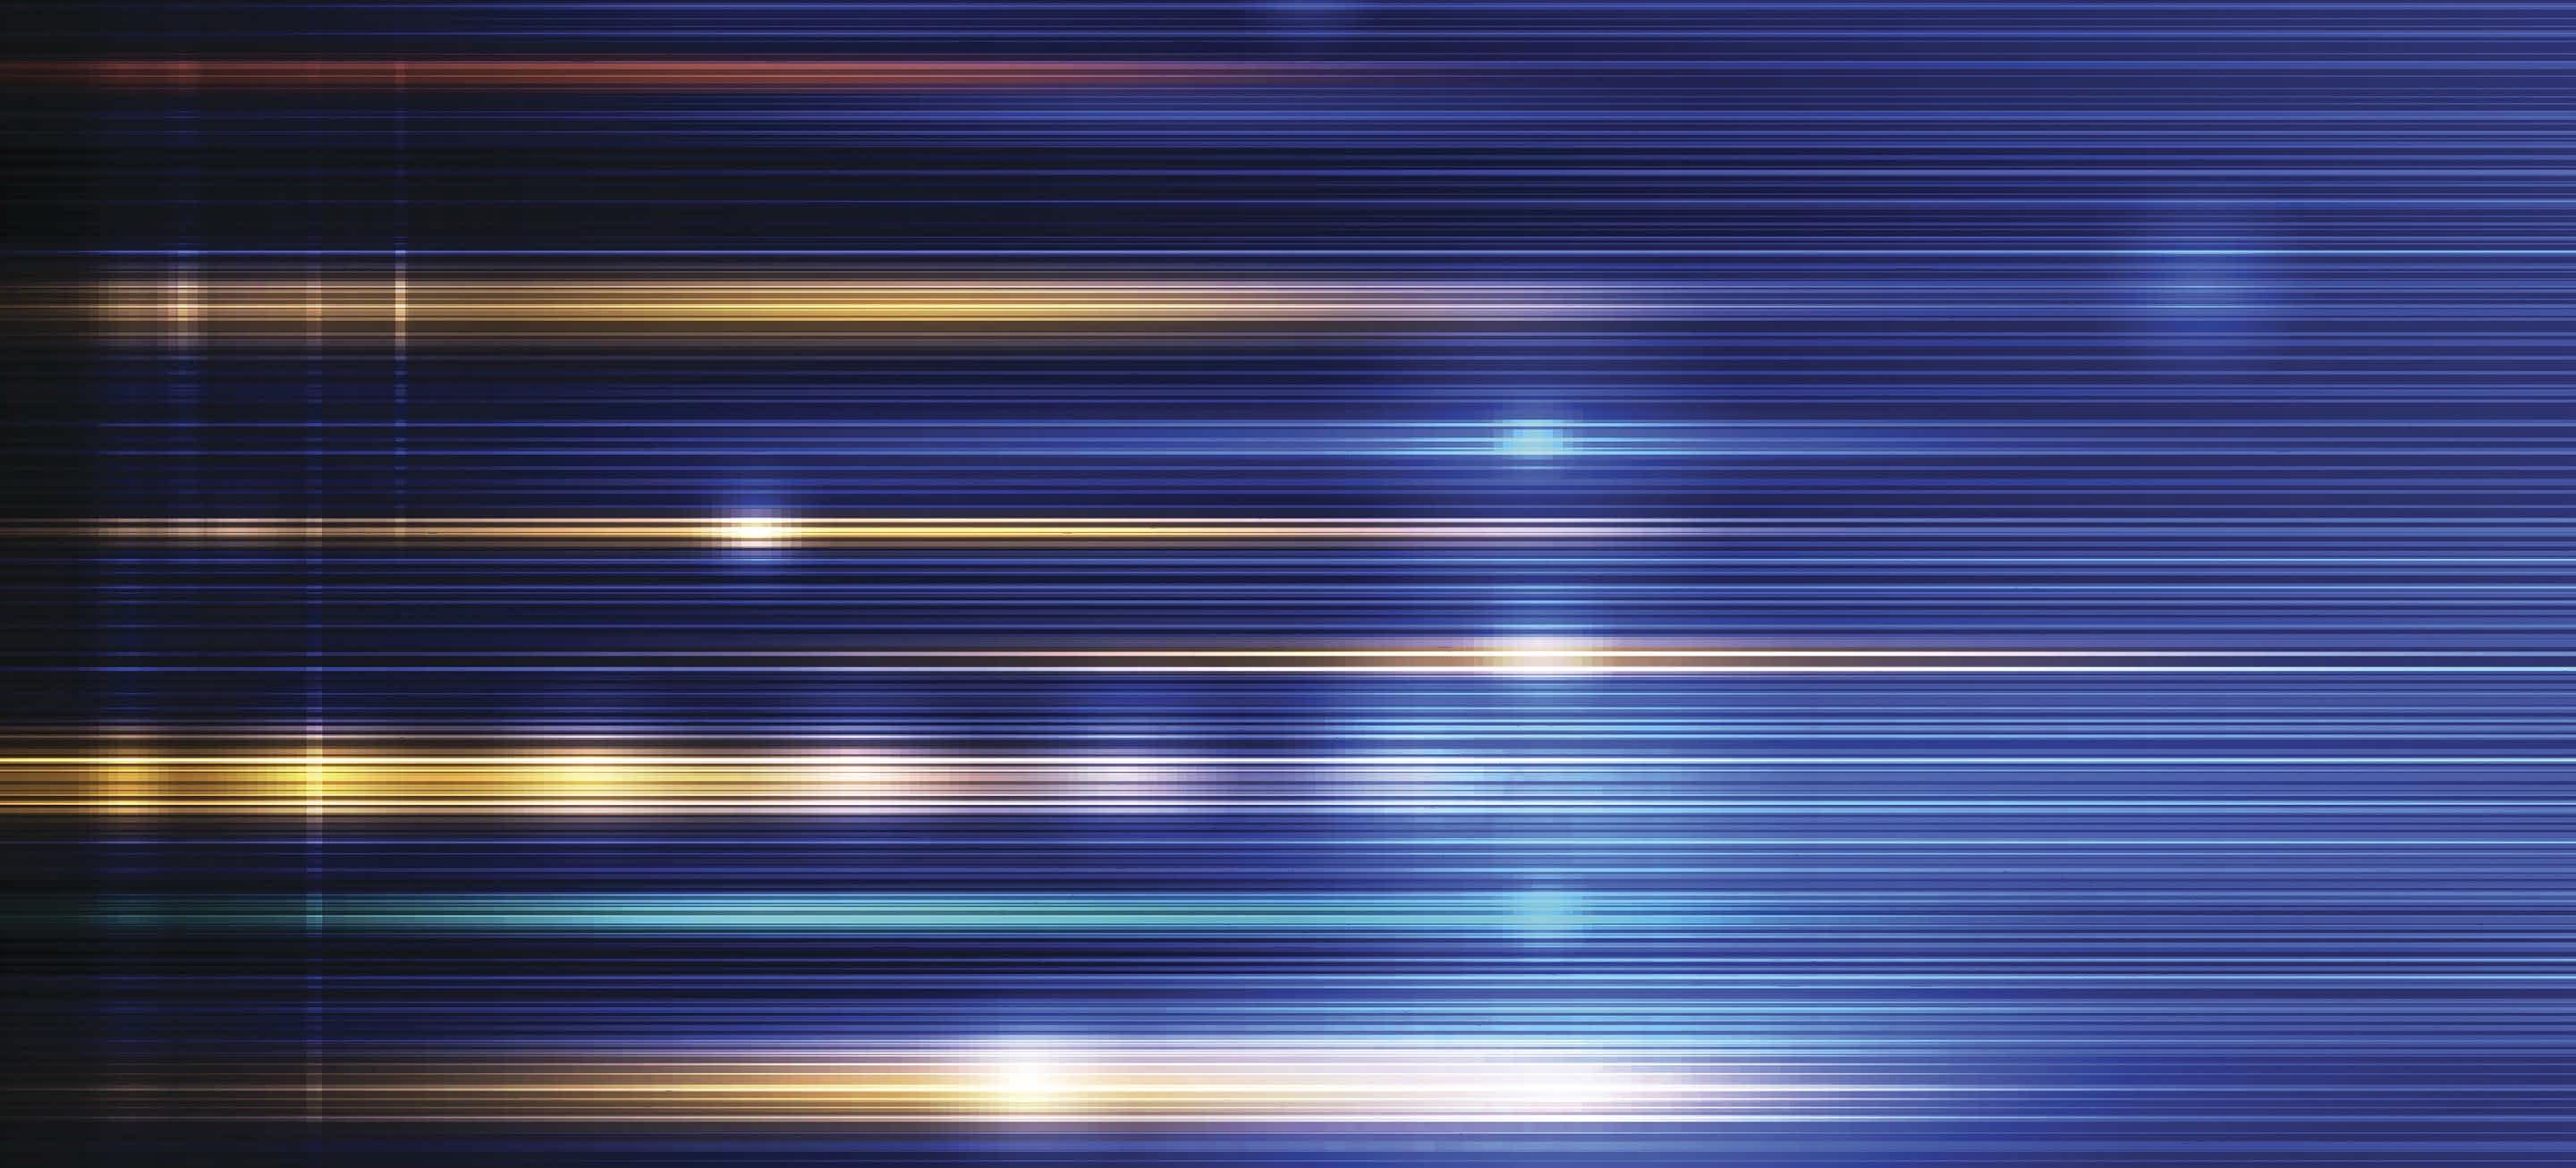 Abstract digital image of yellow and blue light